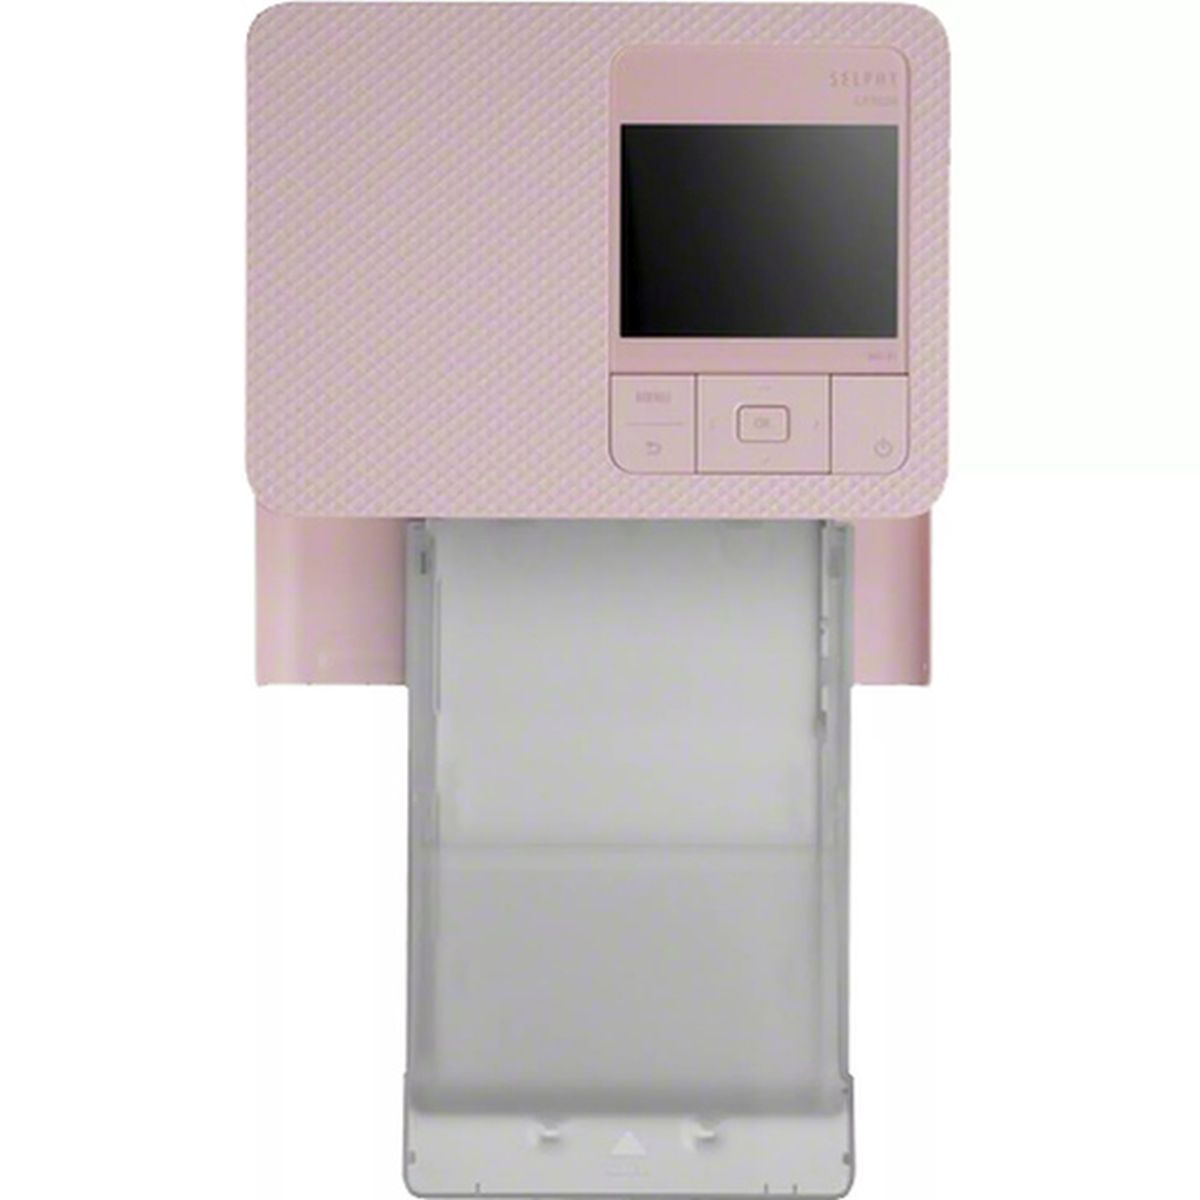 Canon Selphy CP1500 Drucker pink